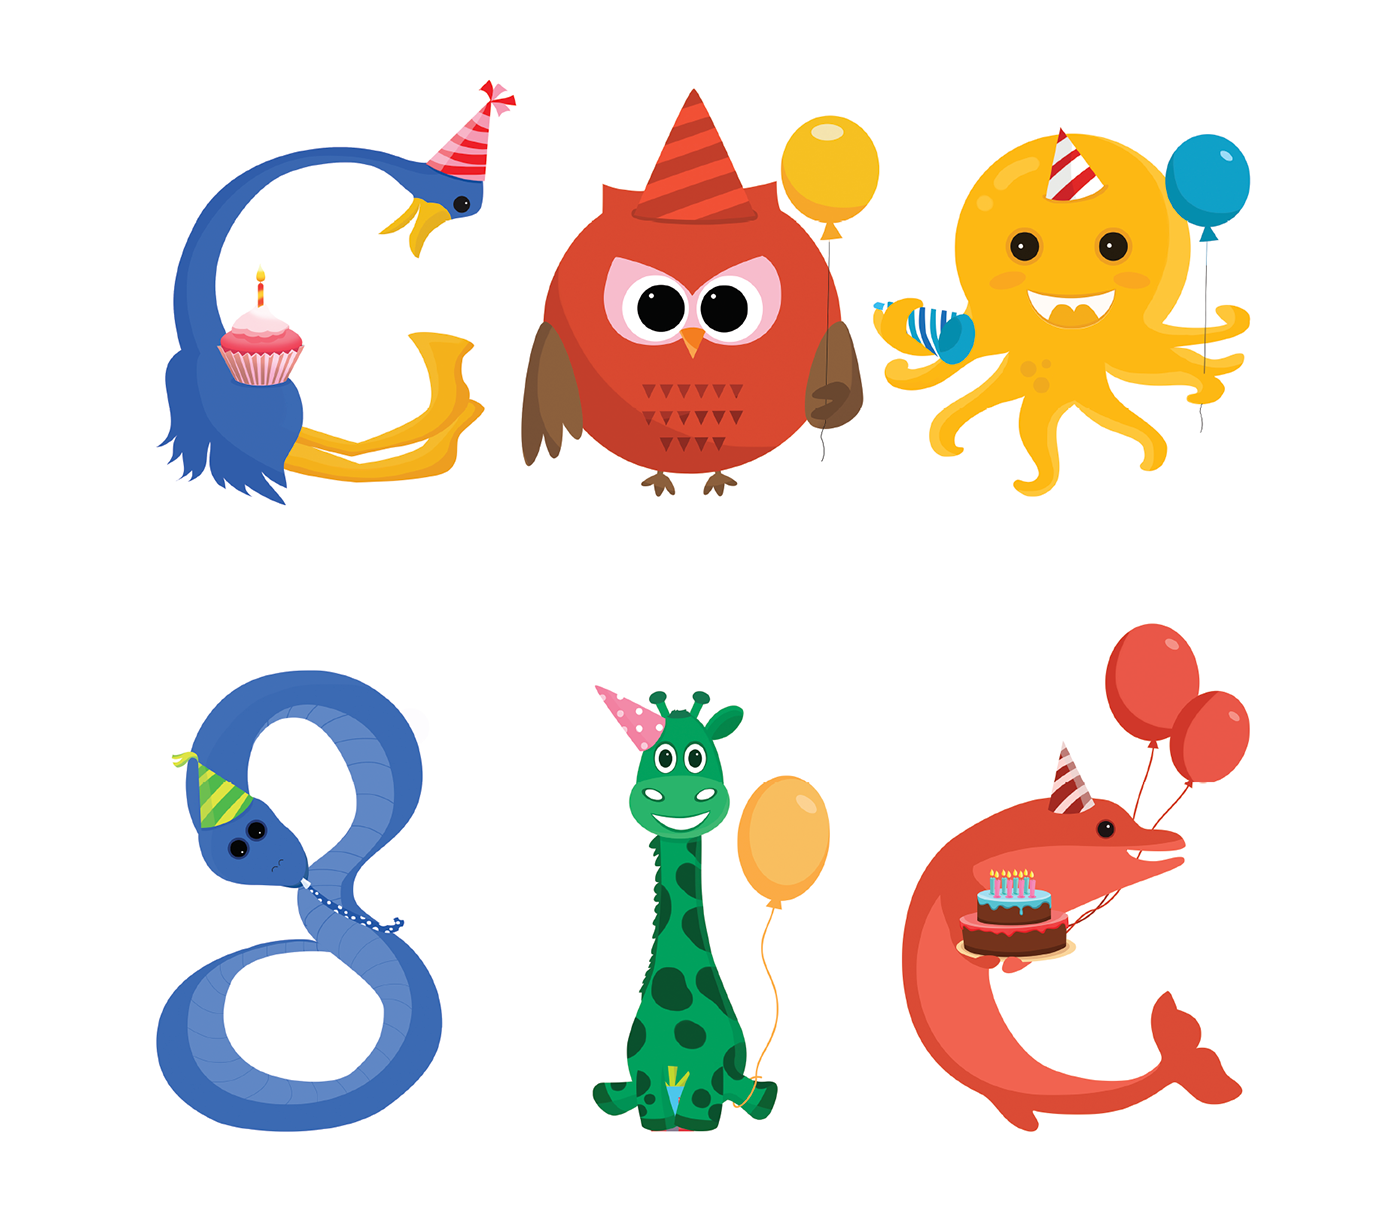 #google #After Effects #illustrations #animals #happy   #birthday gifs googledoodle